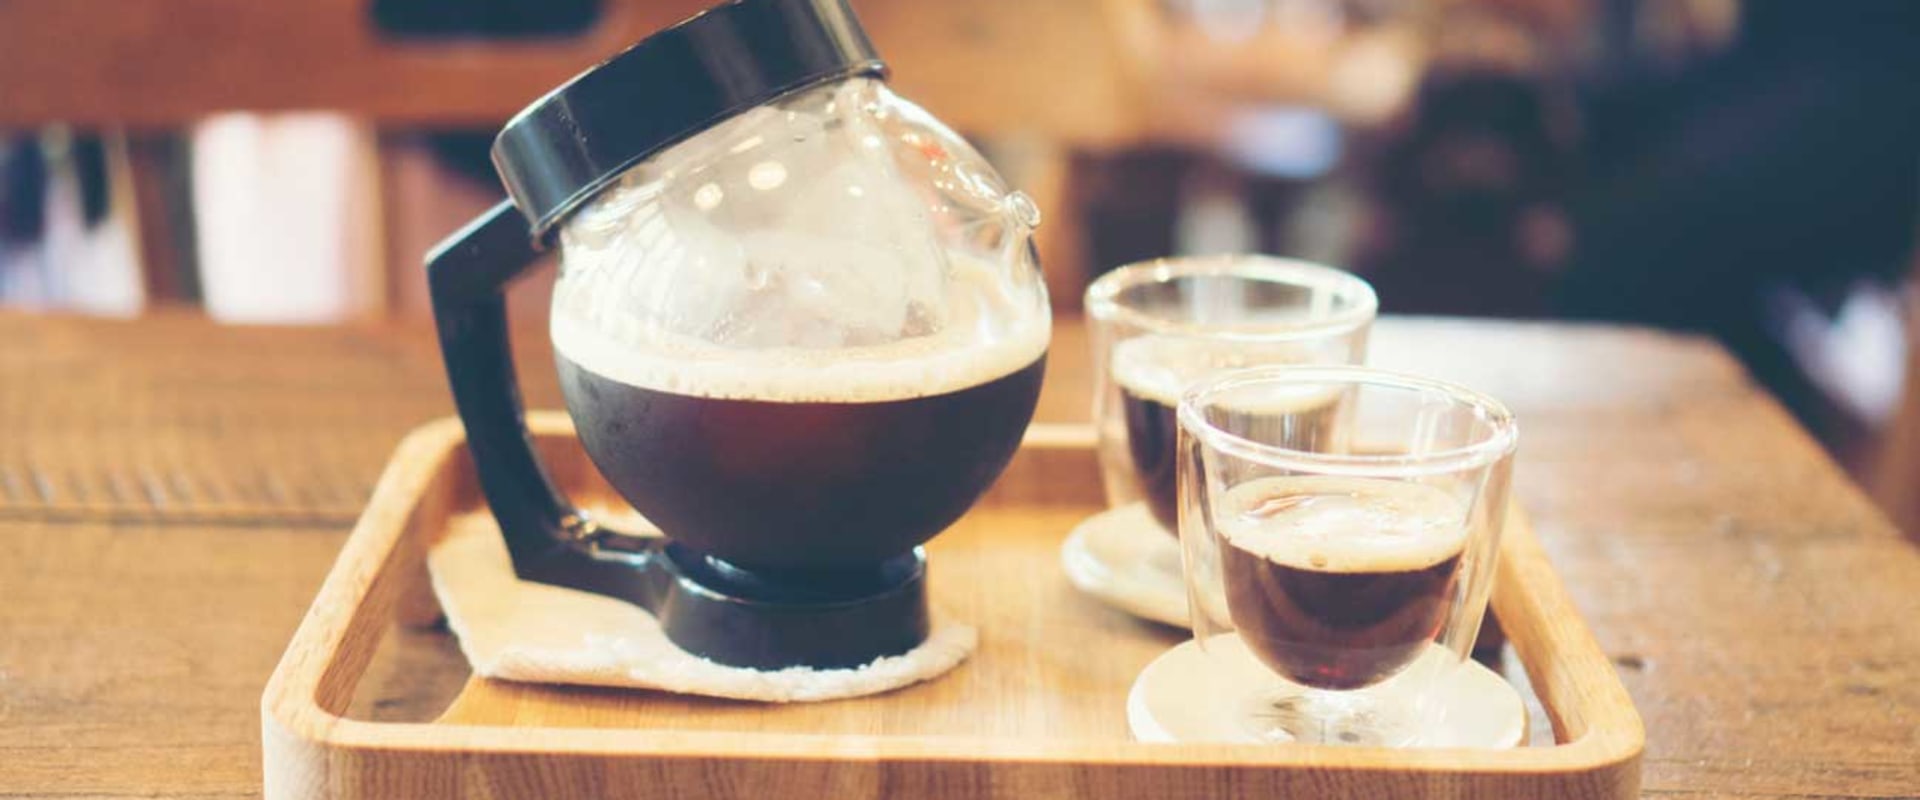 Does nitro cold brew taste better than cold brew?